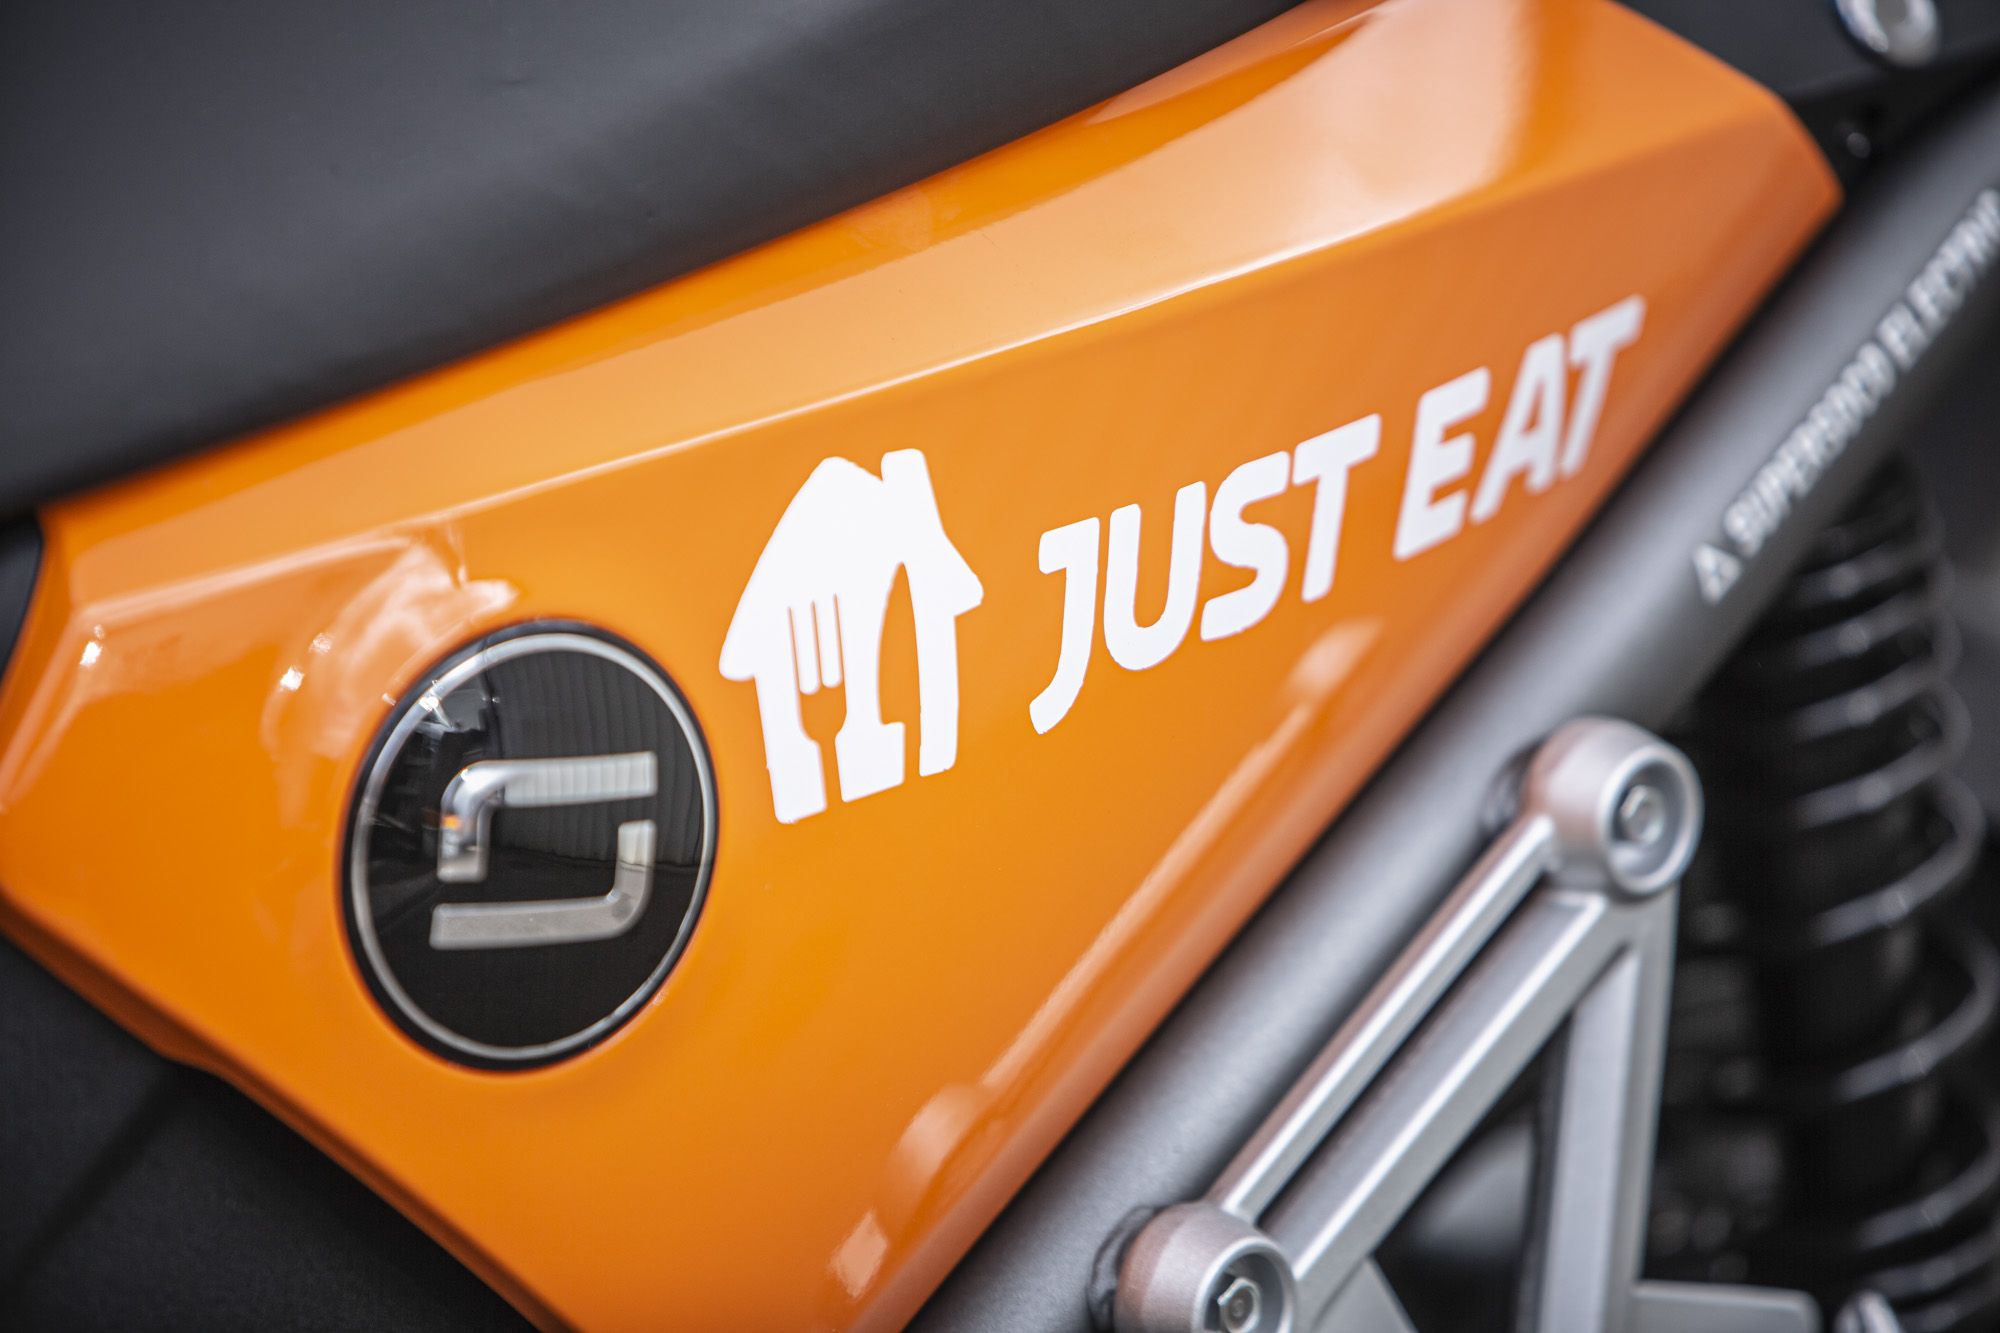 Super Soco CPx Just Eat Delivery scooters for GreenMo UK